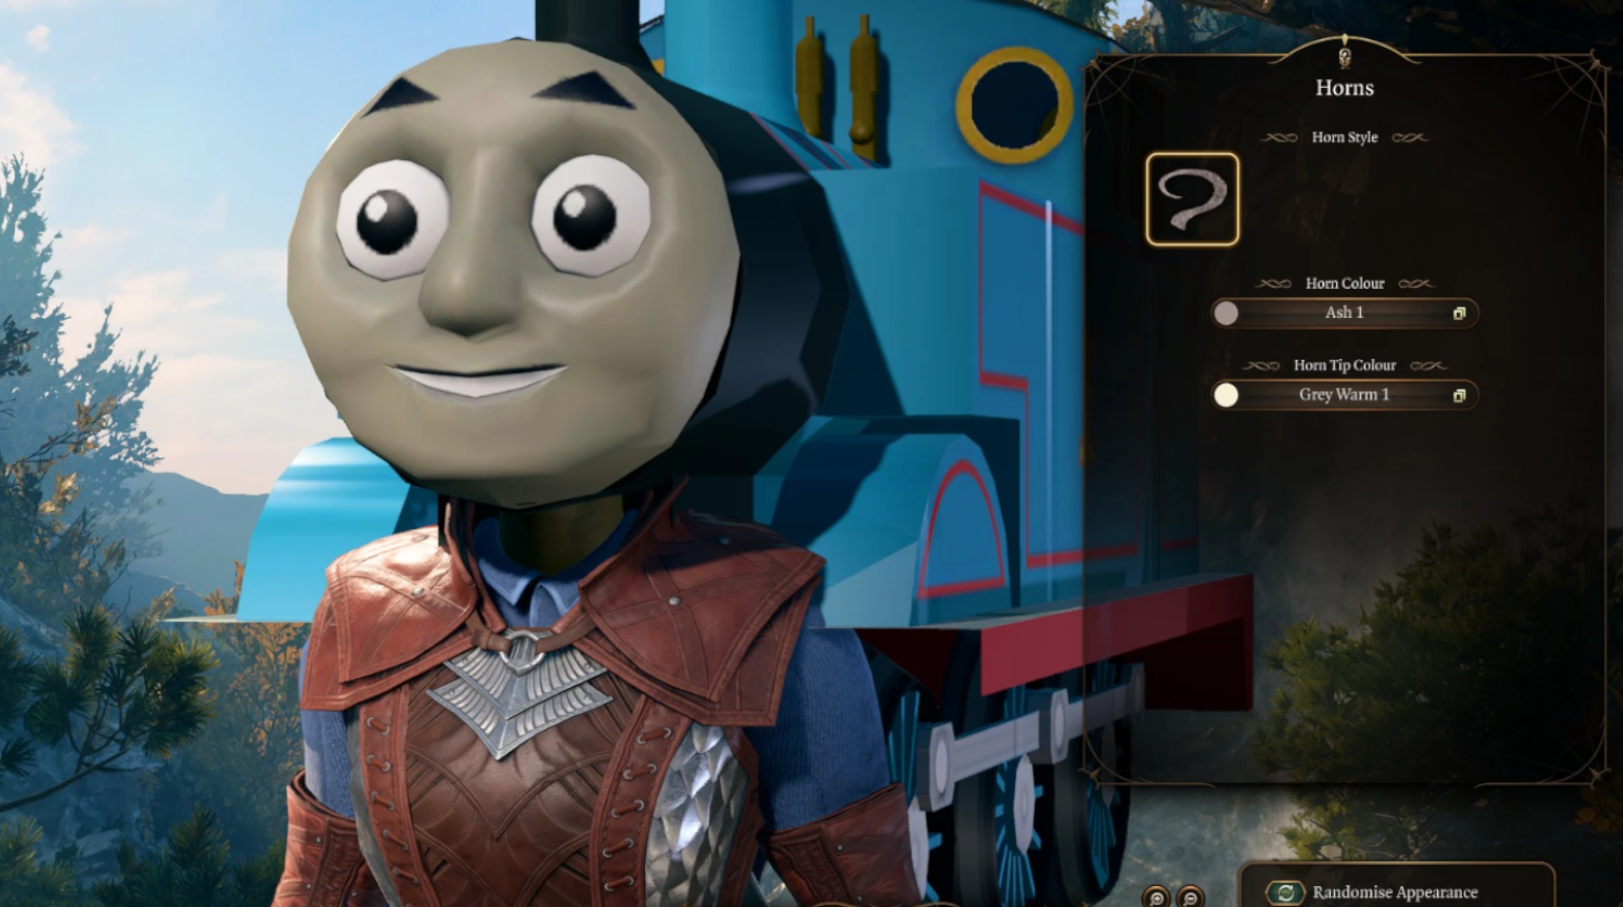 It's just tradition that Thomas the Tank Engine gets modded into every game.